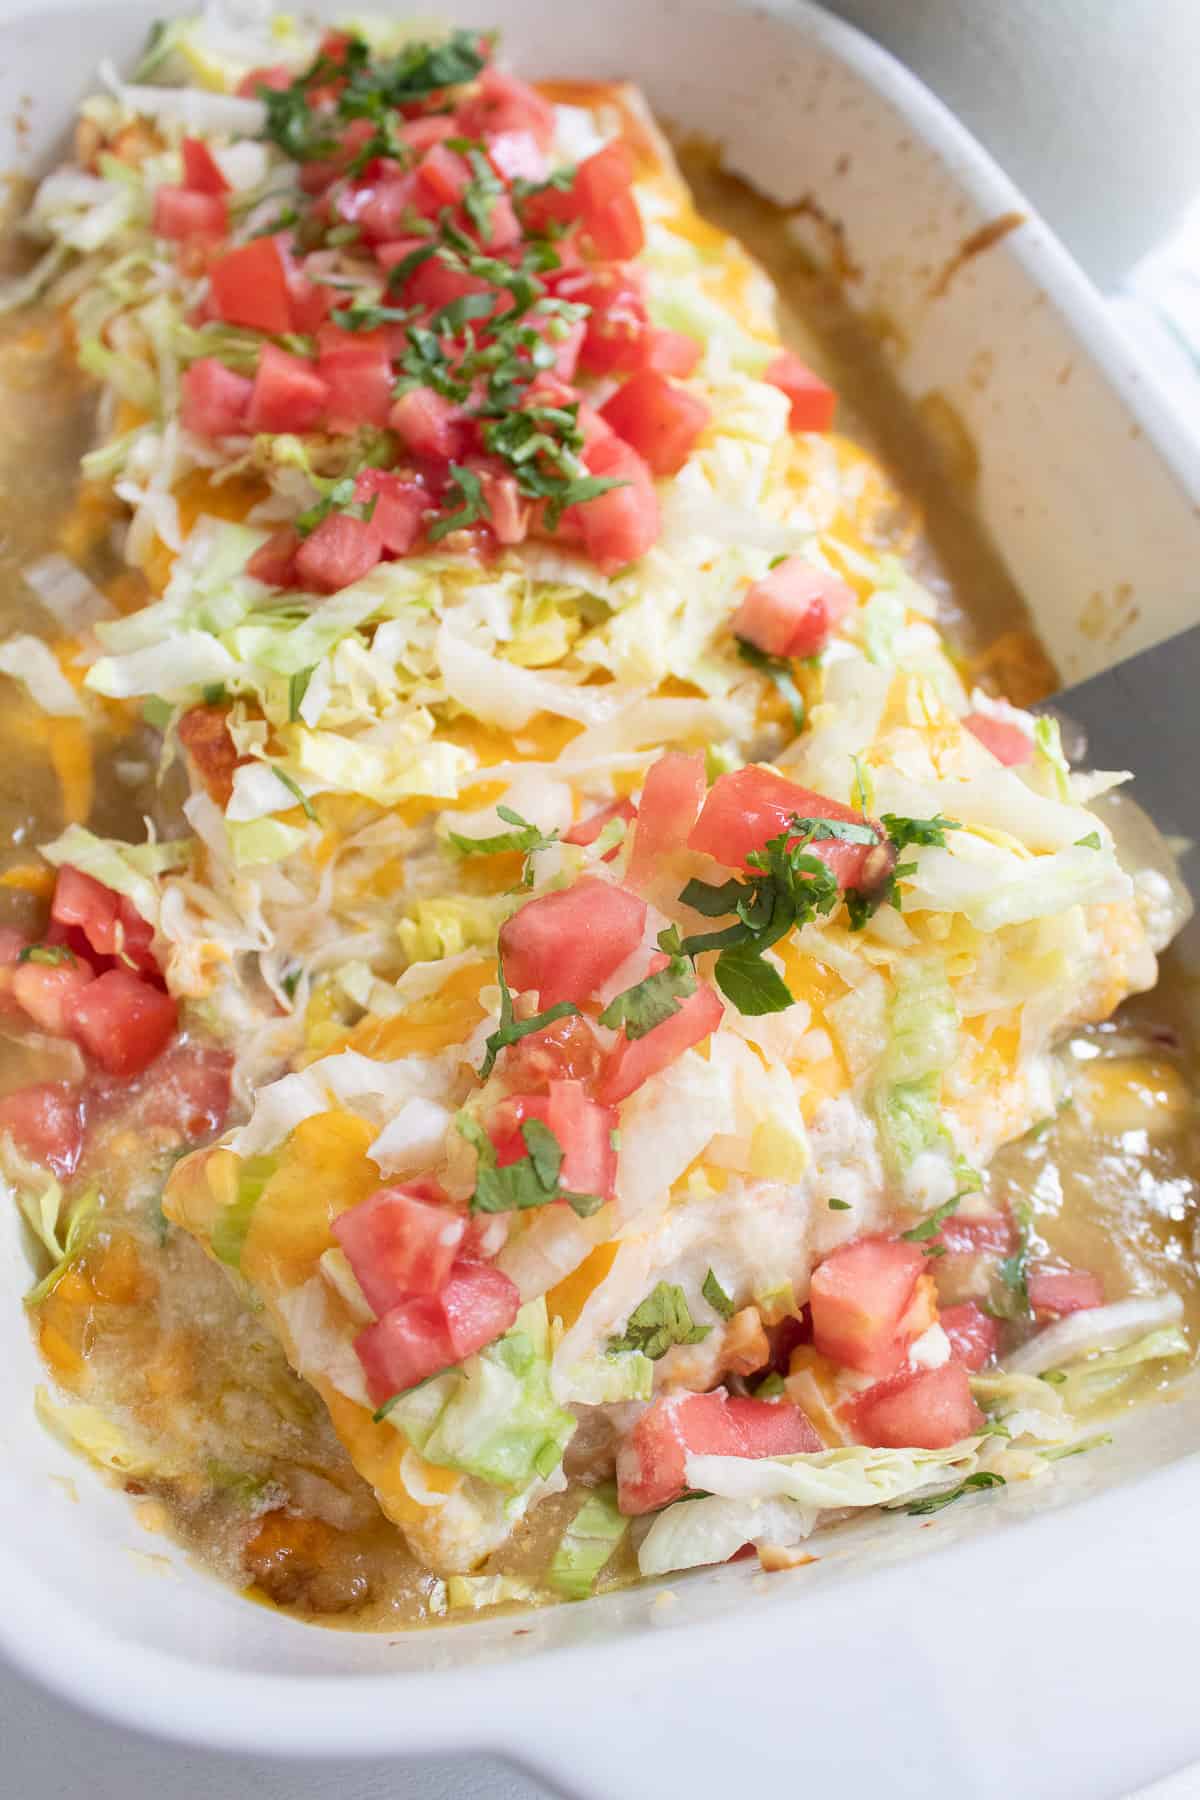 A serving of the burrito casserole is lifted from the pan.